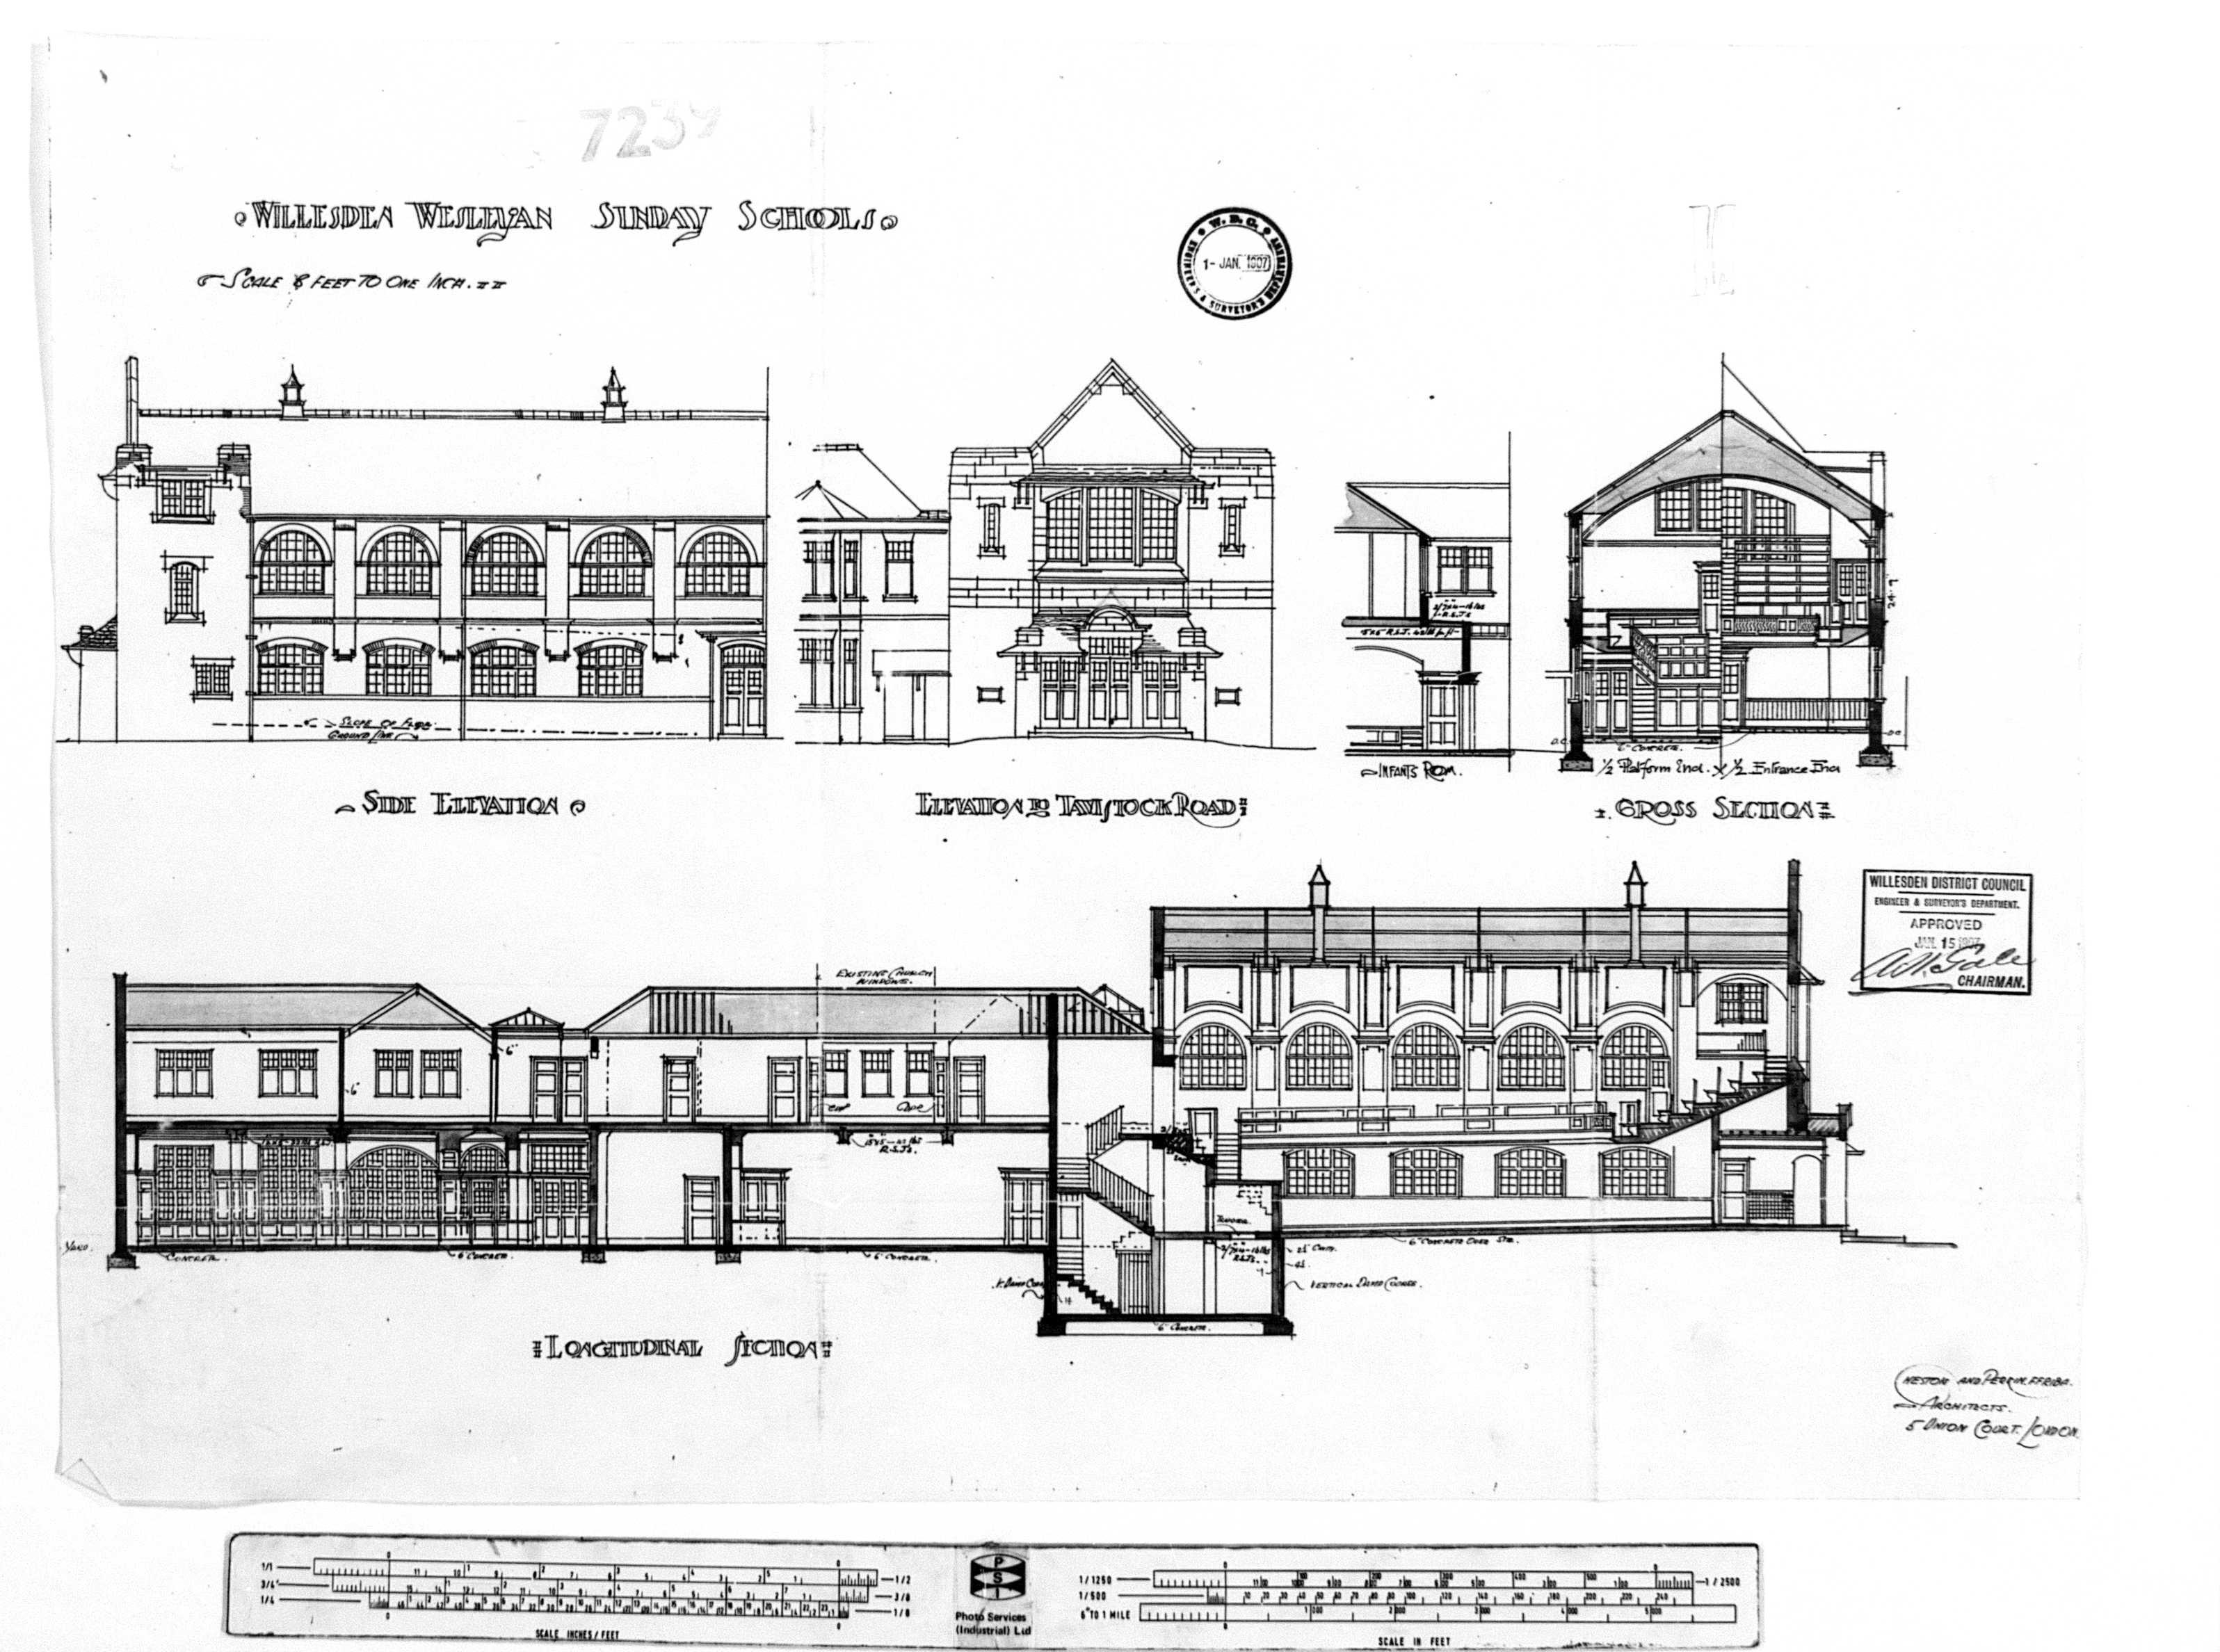 Black and white image of architectural line drawings of a building, annotated, ‘Elevation for Tavistock Road.’ and ‘Willesden Wesleyan Sunday School’.